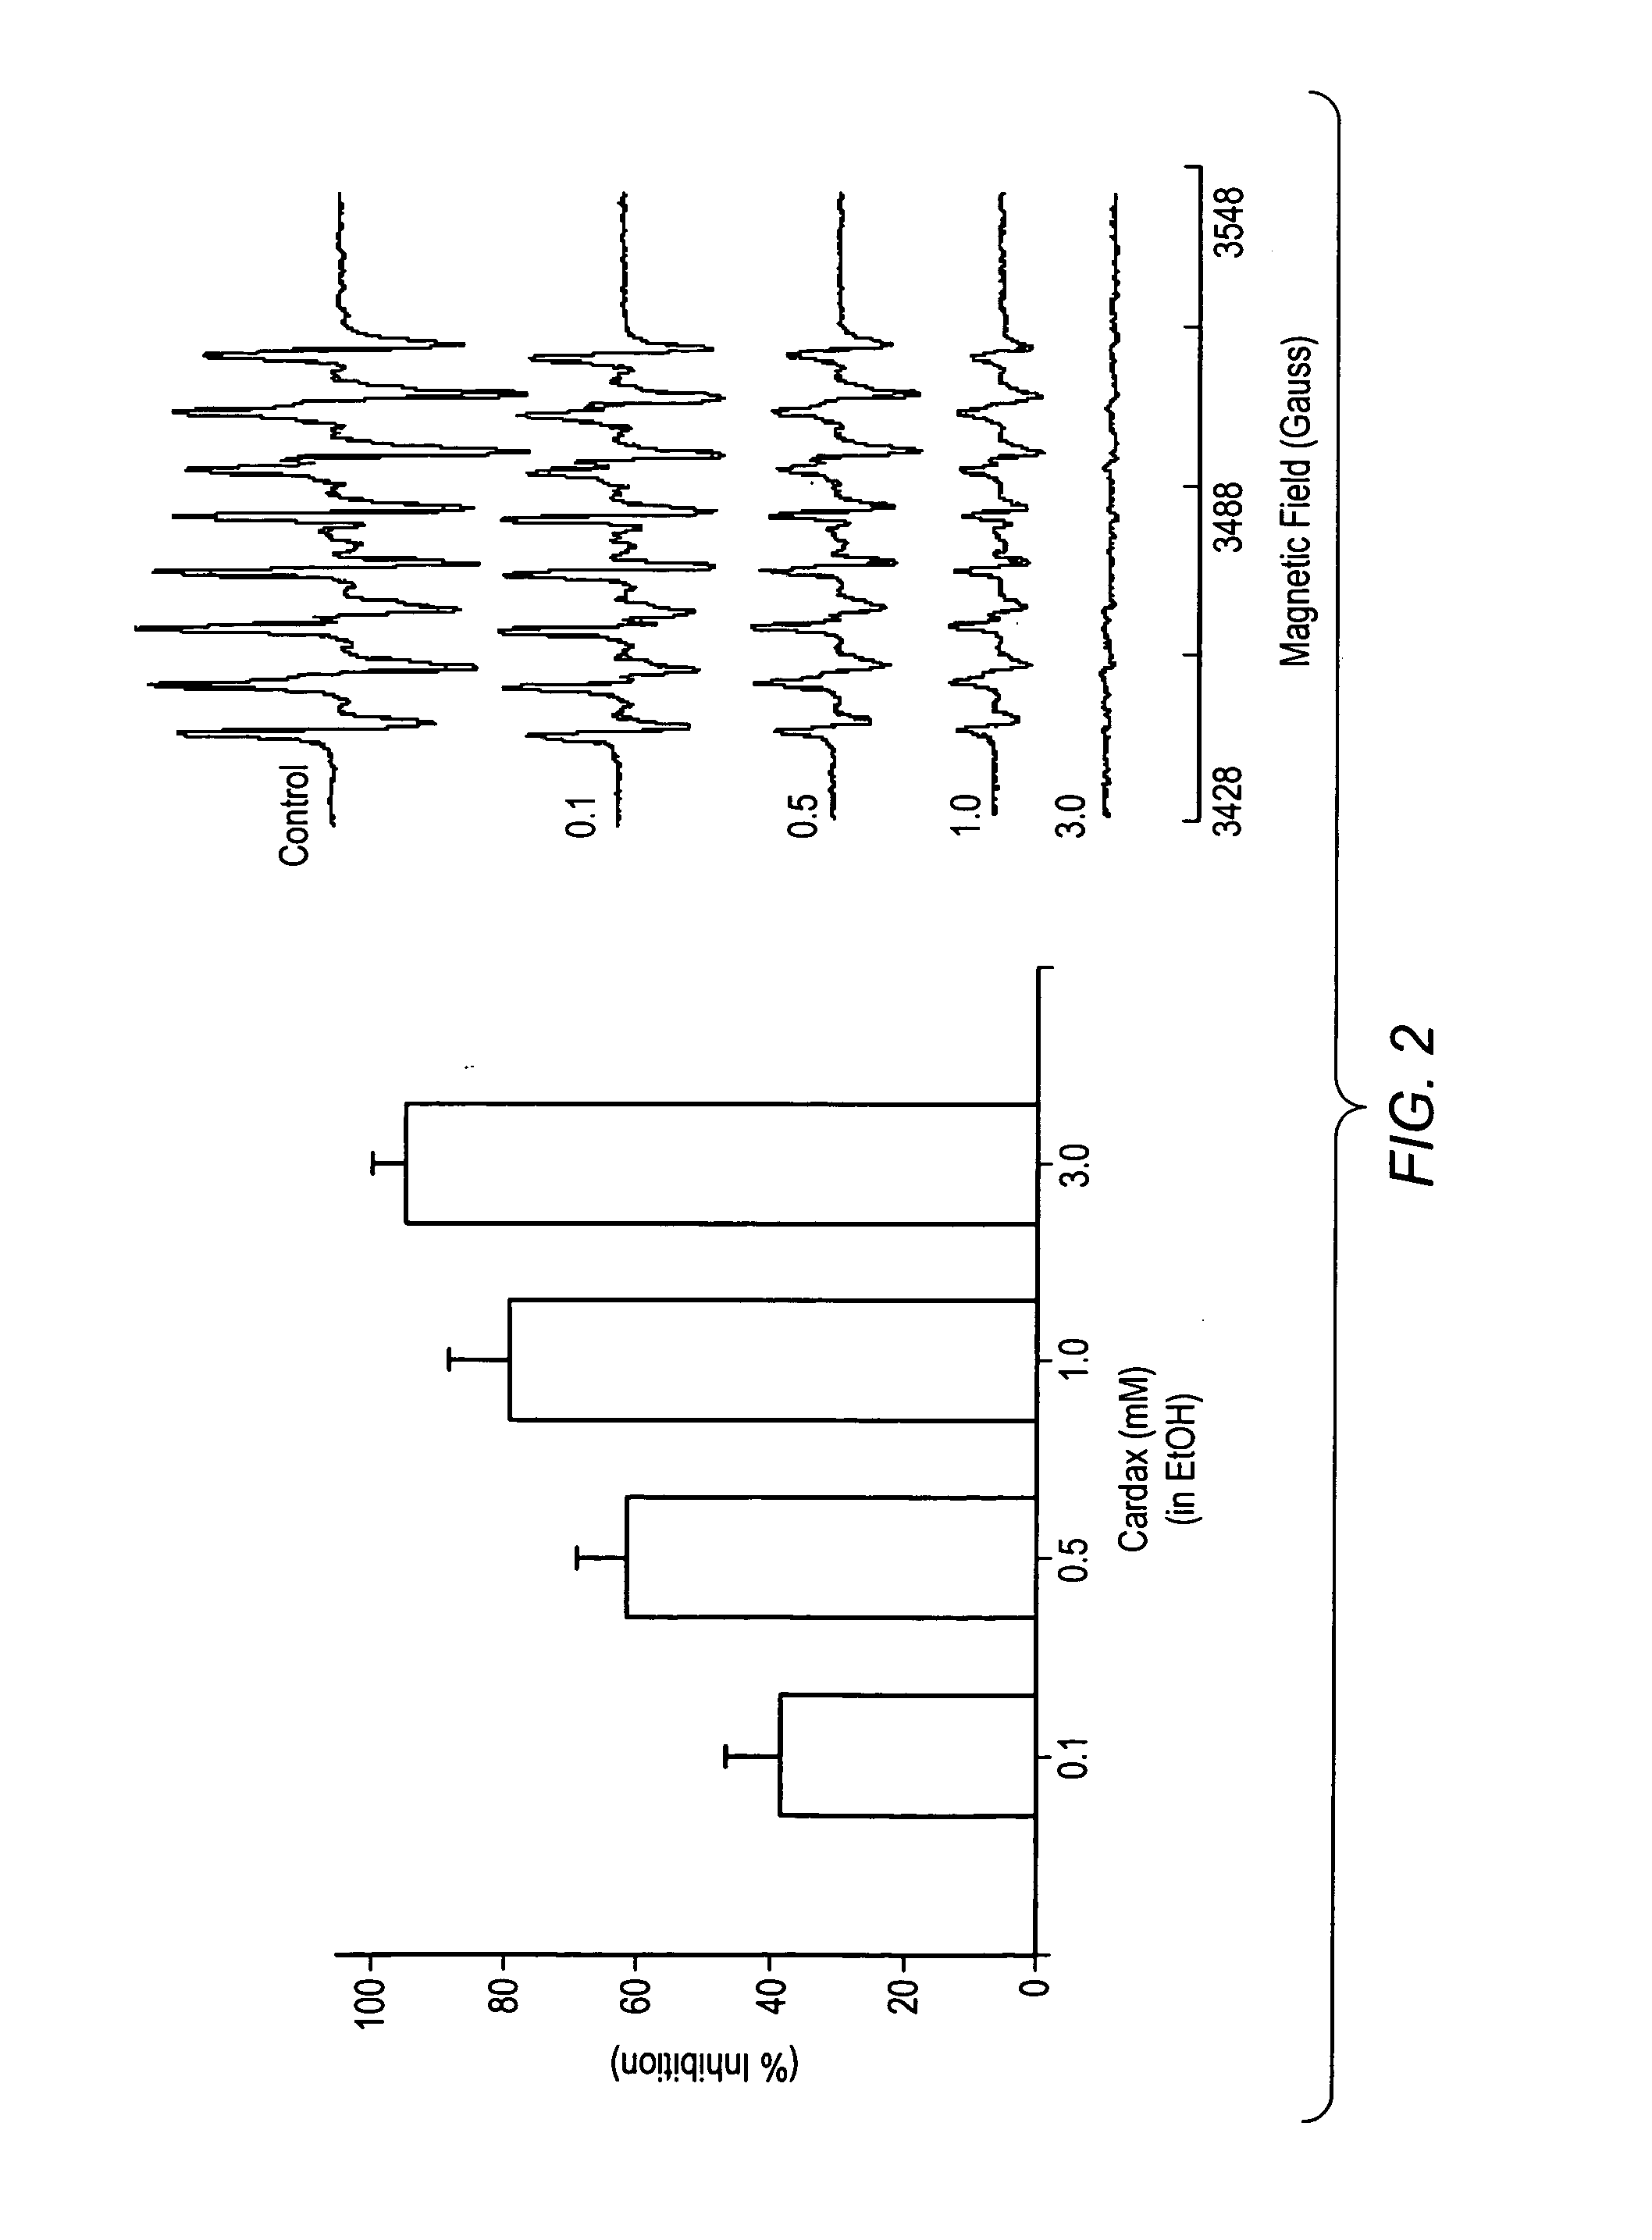 Carotenoid analogs or derivatives for controlling C-reactive protein levels